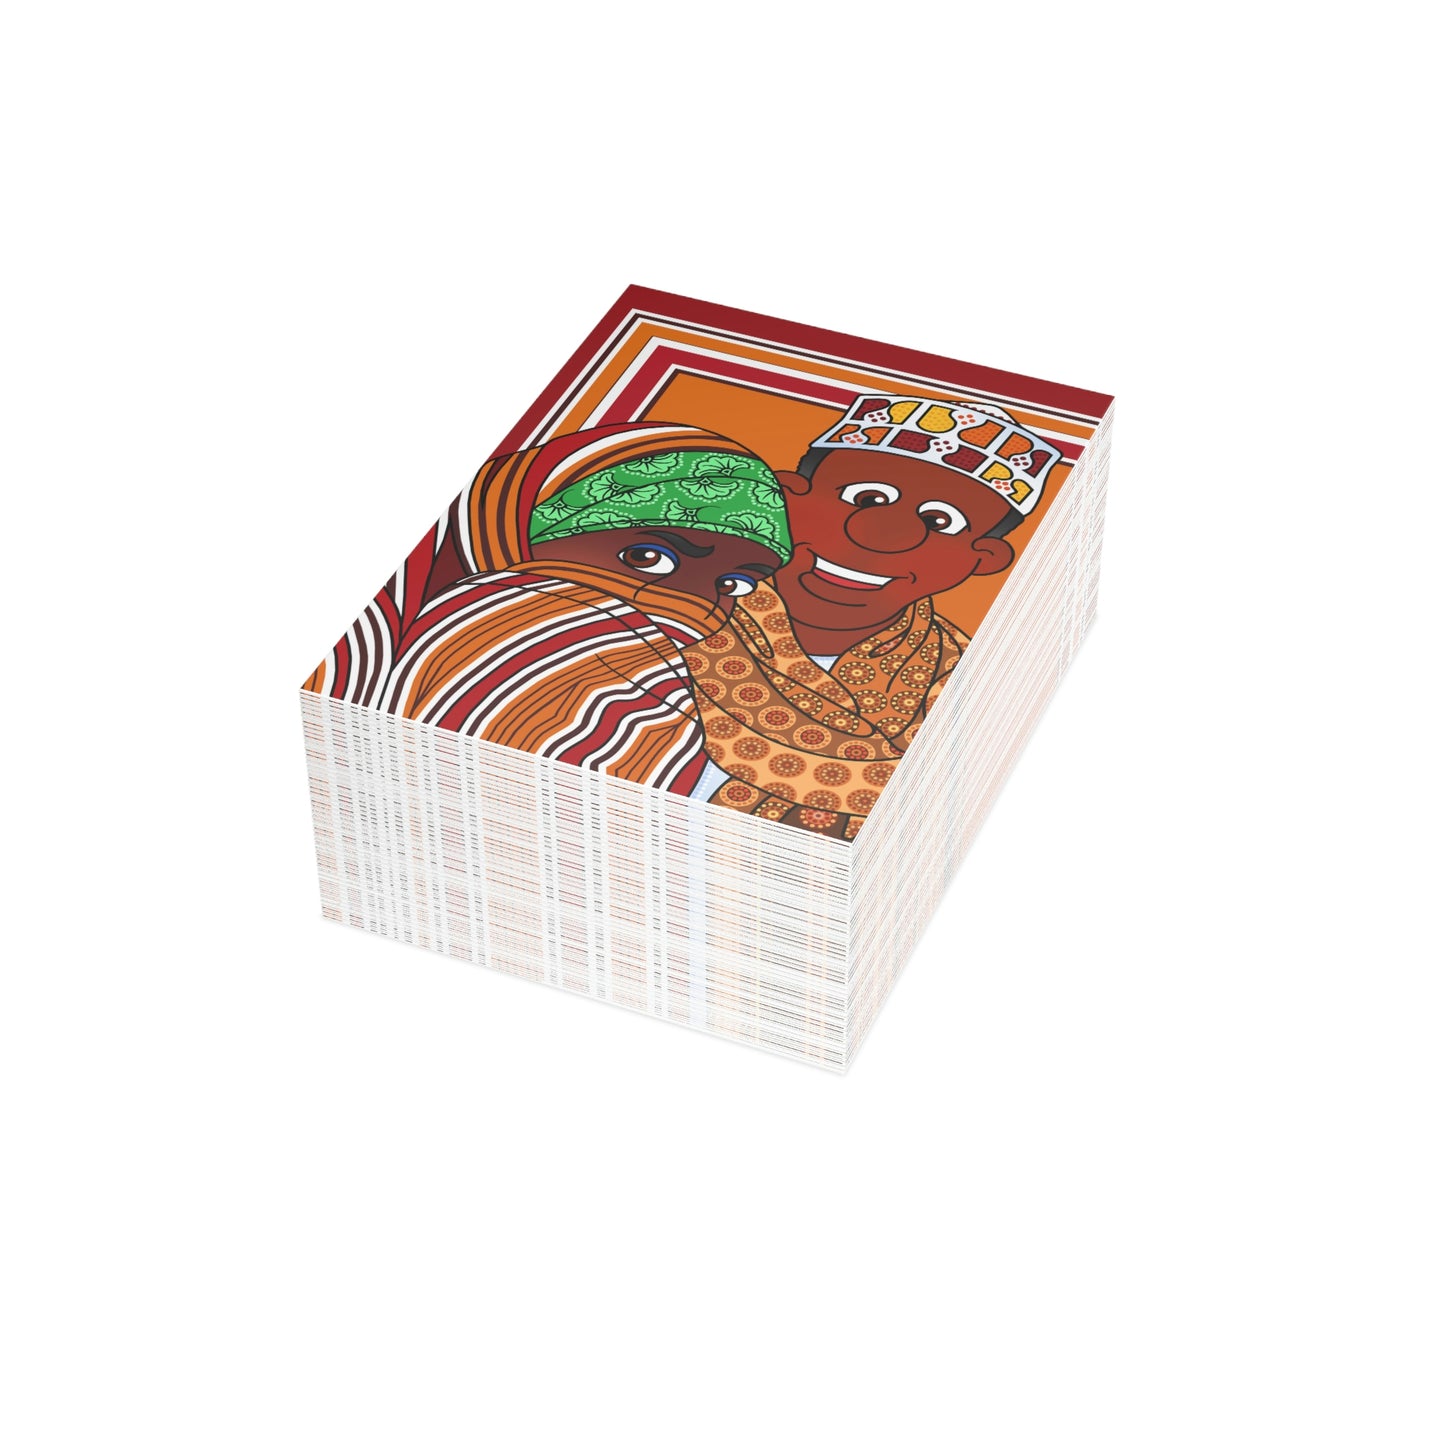 The Kitty Cat Cried! Greeting Card Bundles (envelopes not included)